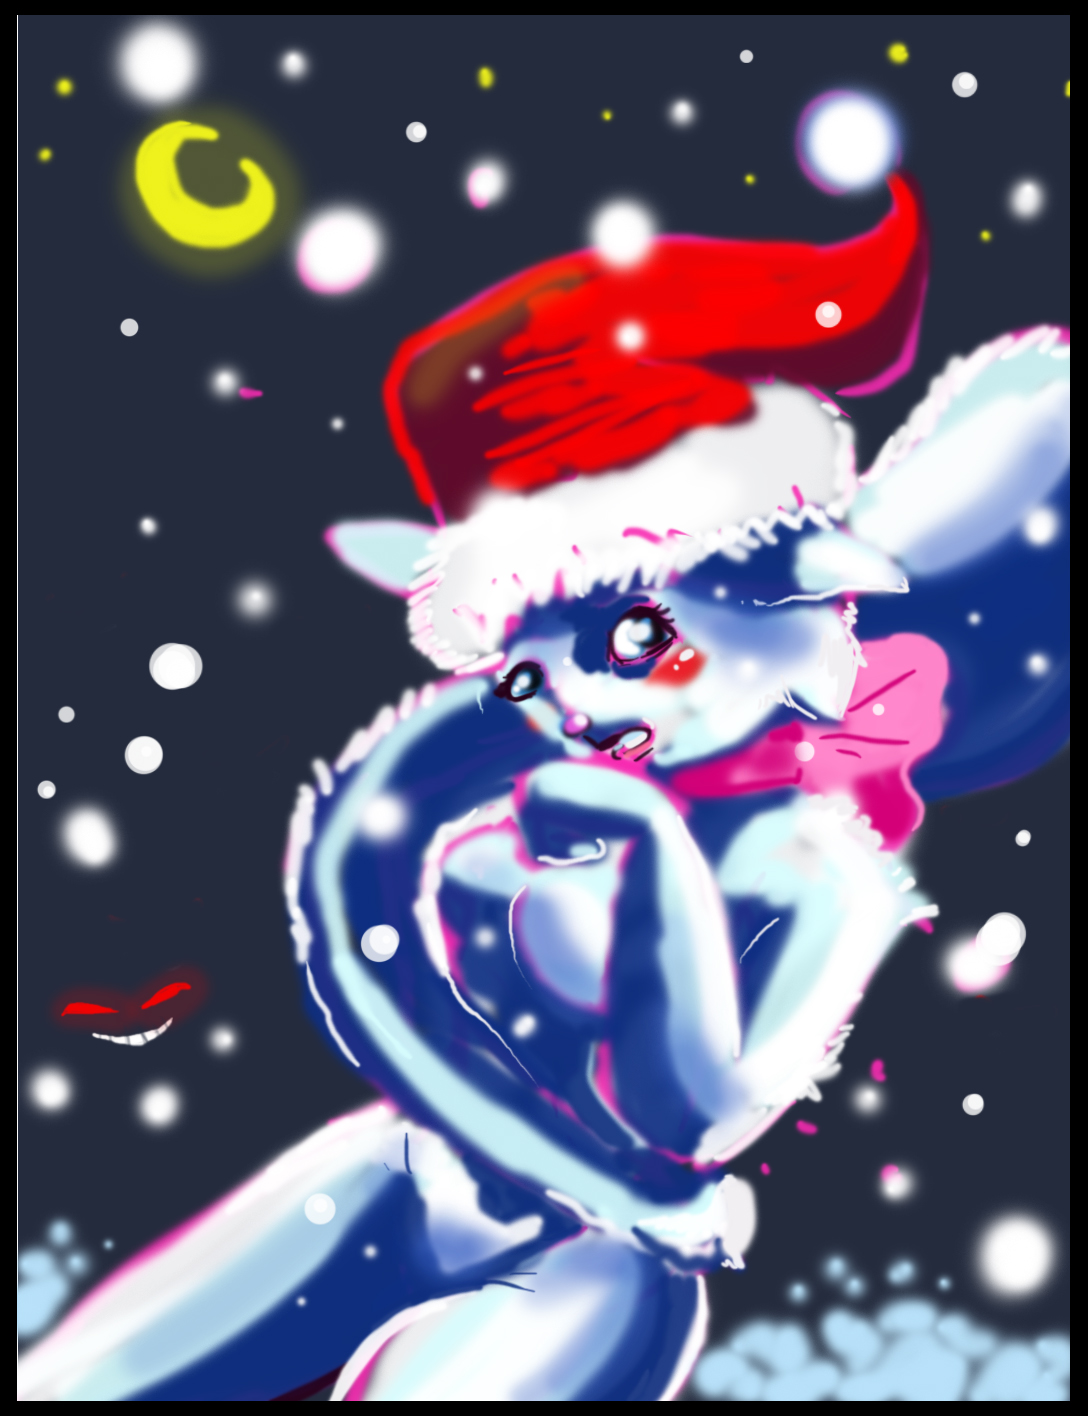 Candybooru image #143, tagged with Christmas Lucy Sky_(Artist) snow